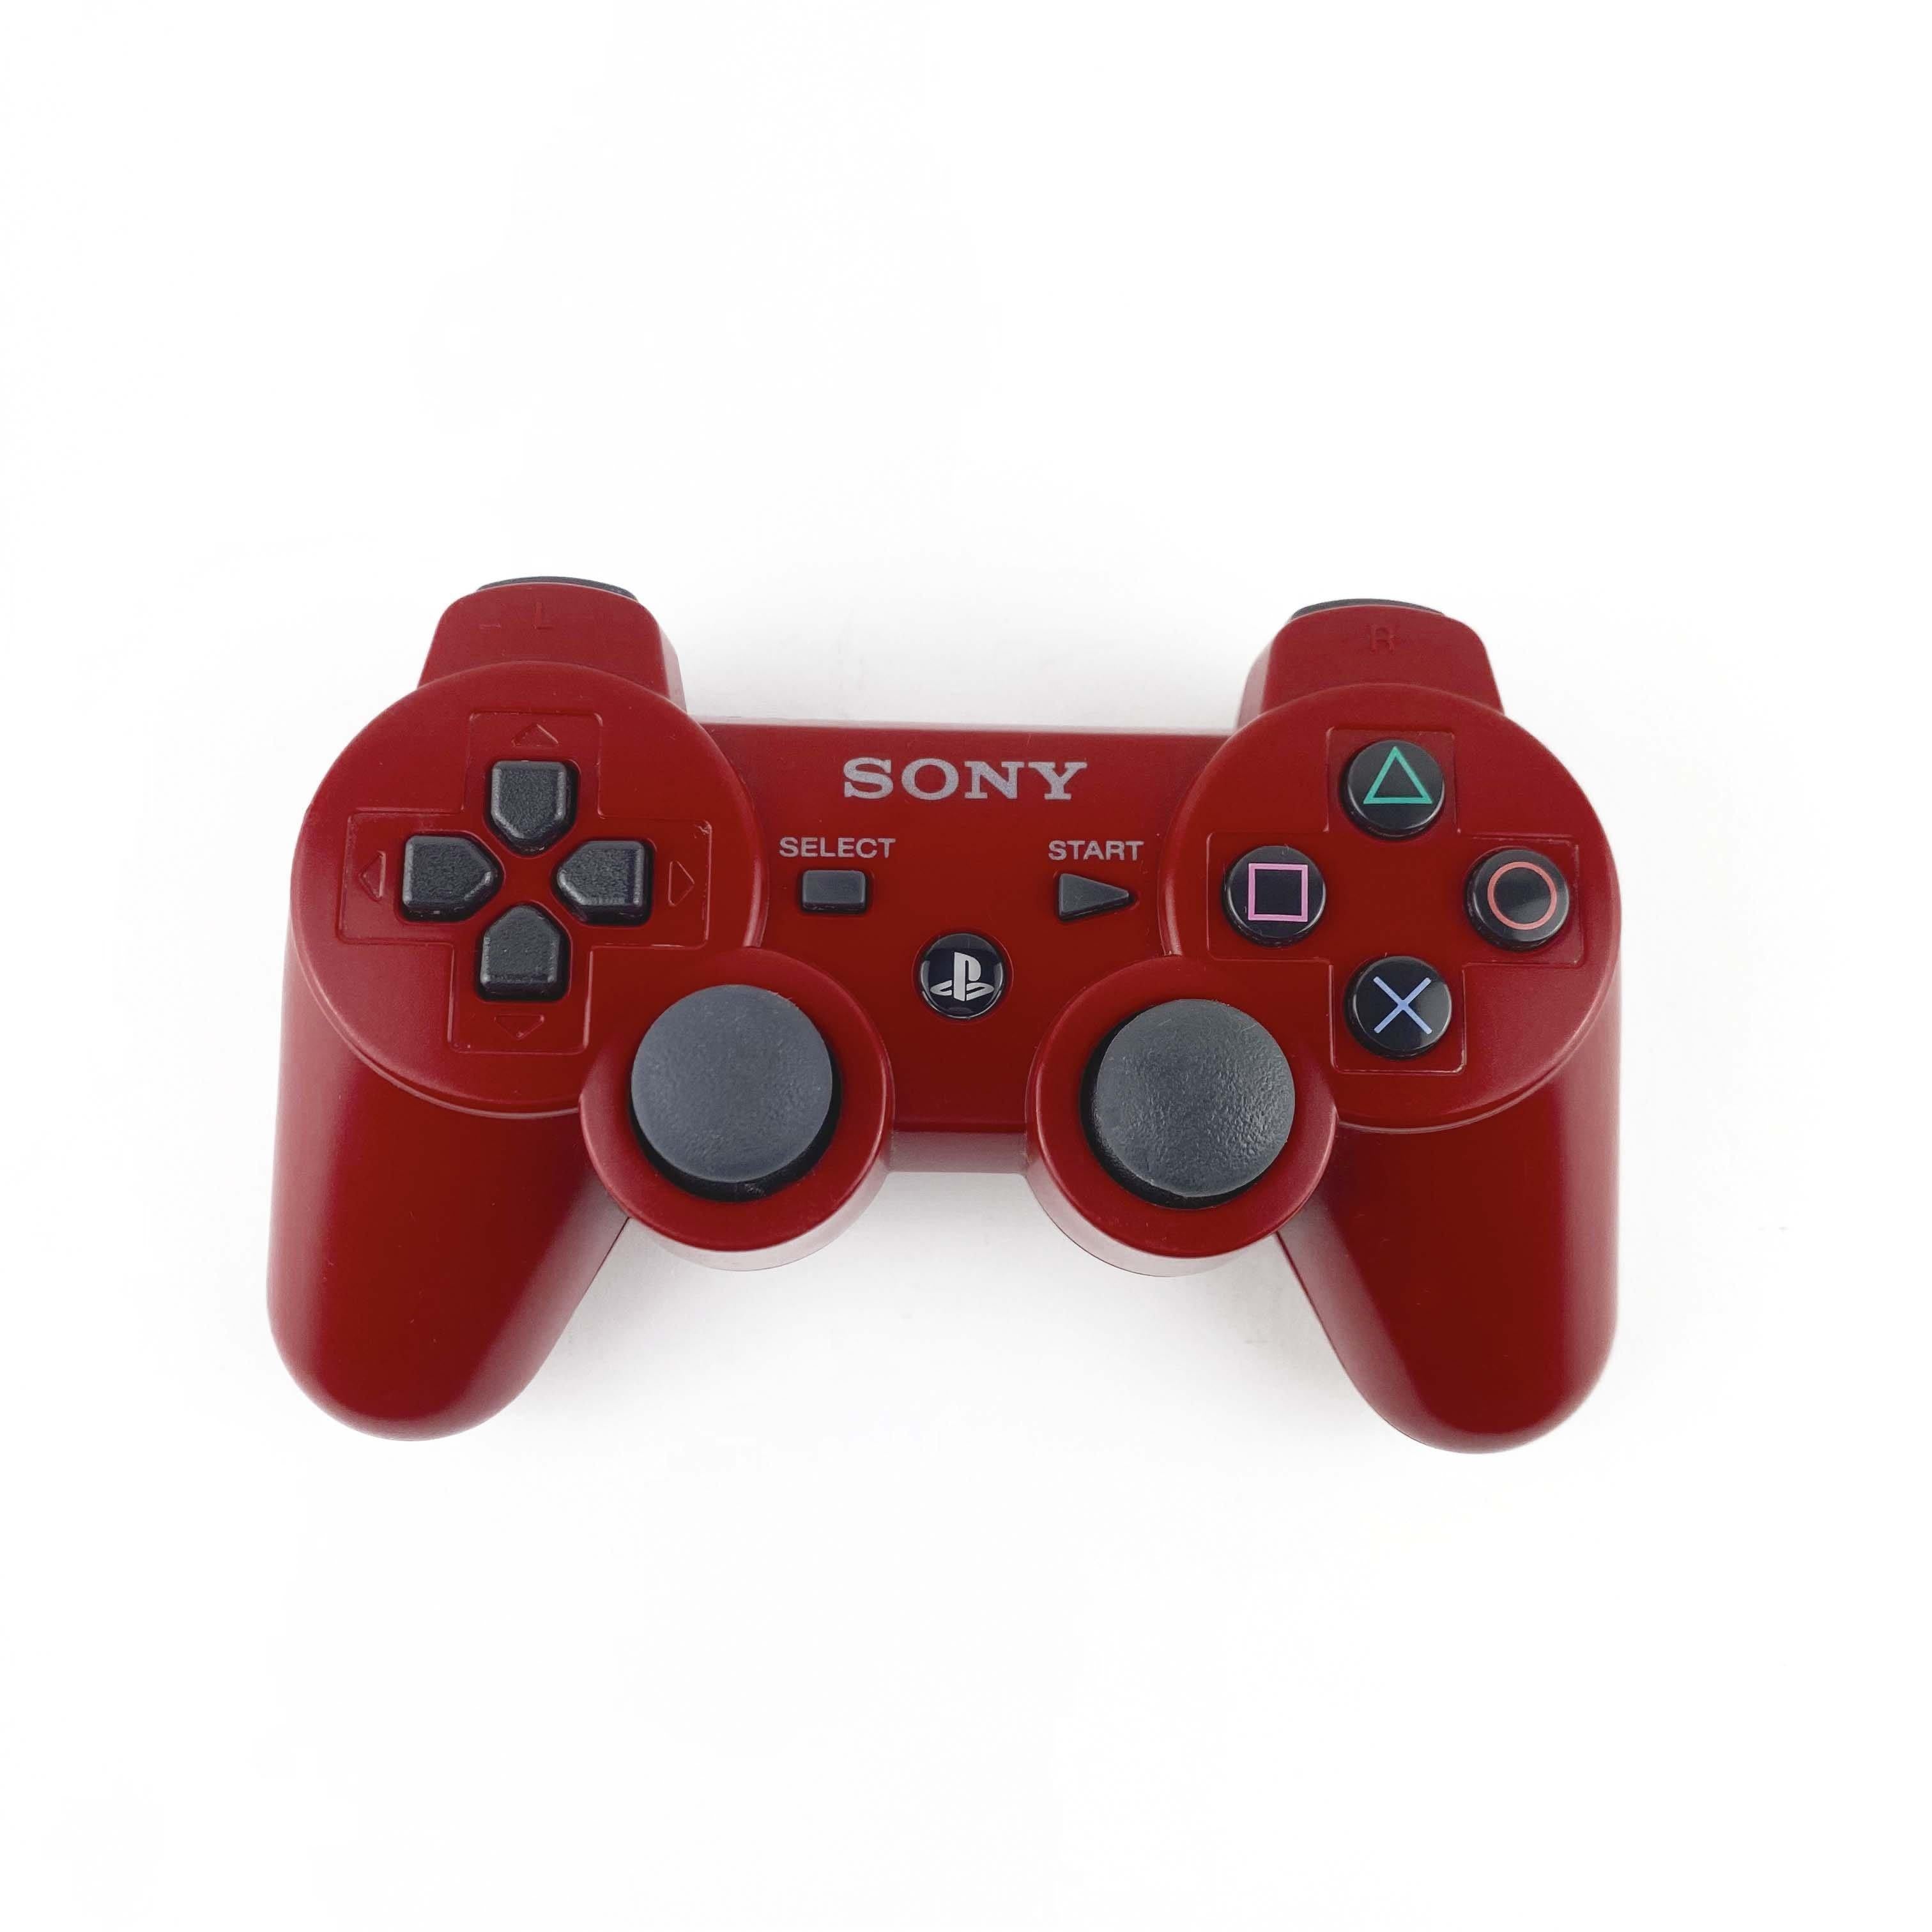 Sony PlayStation 3 PS3 Red Wireless Controller